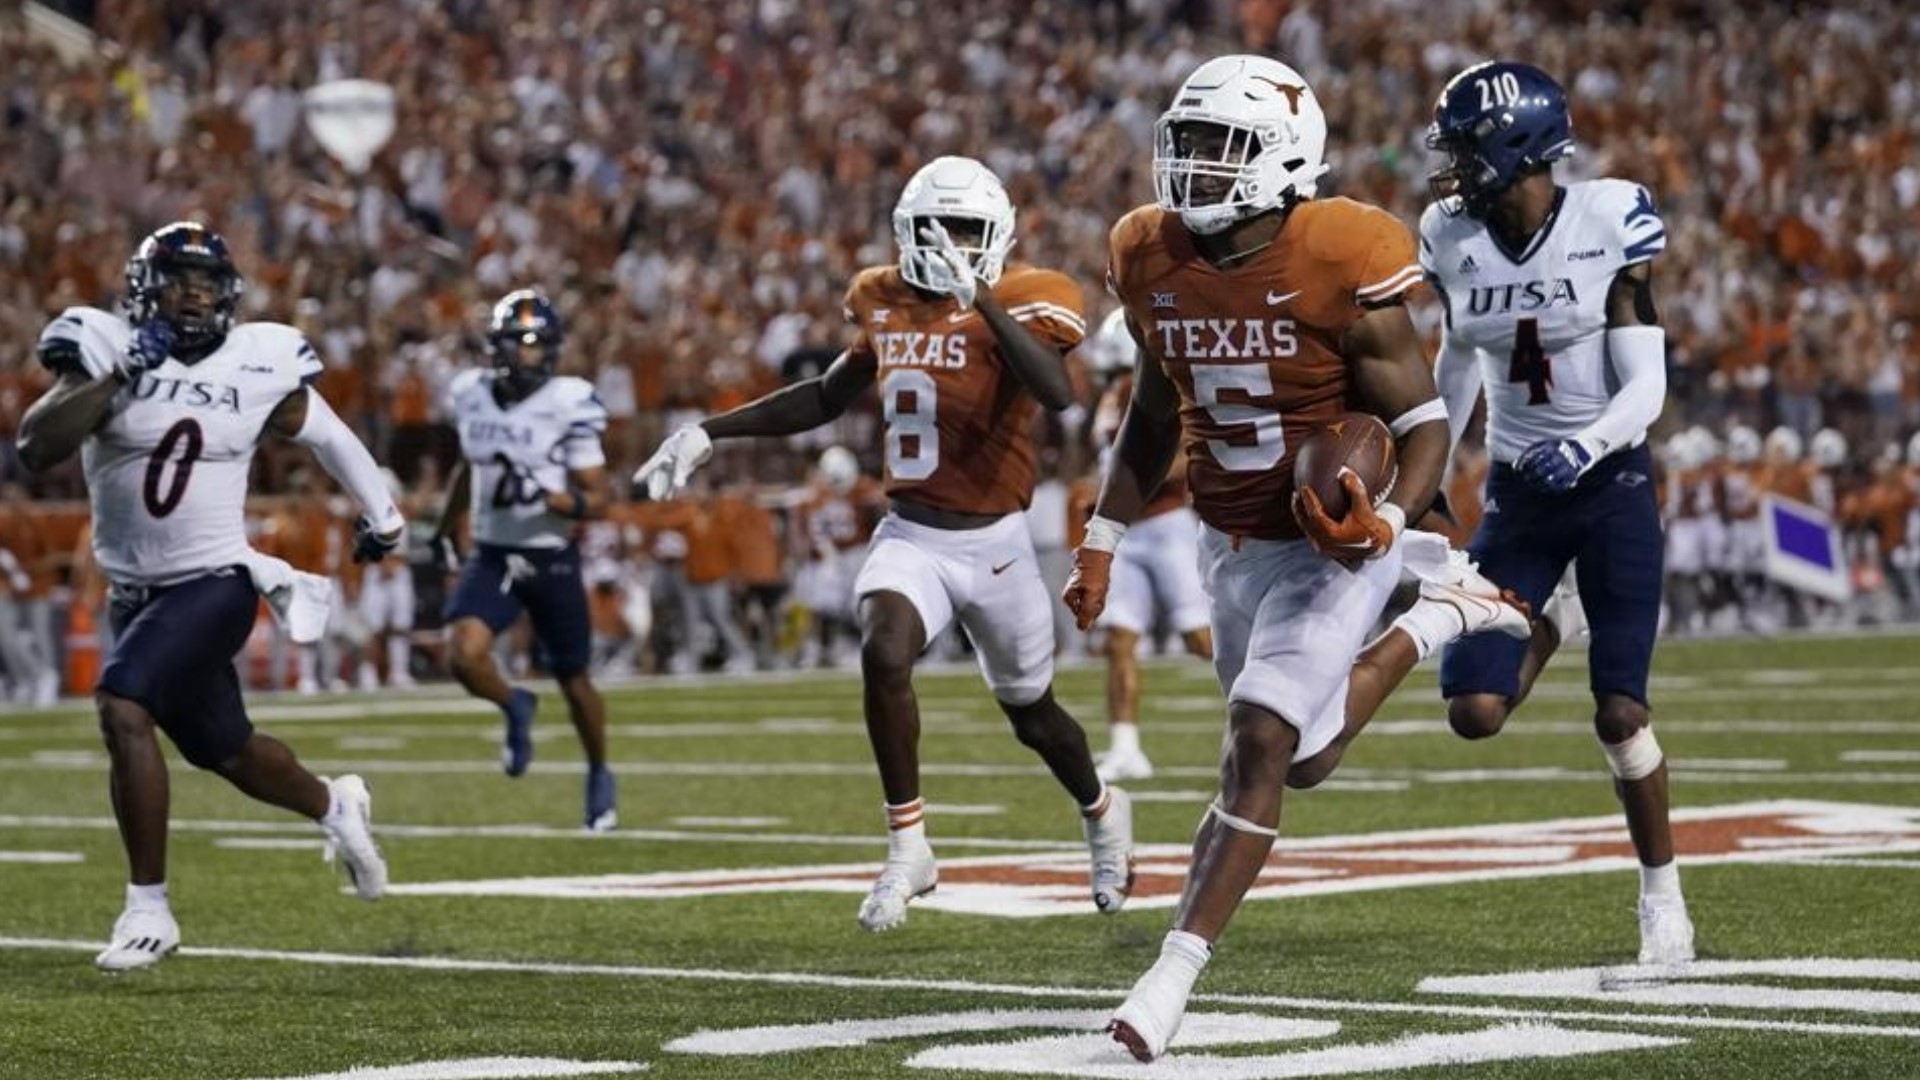 No. 21 Texas pulled off a win over the Roadrunners on Saturday.